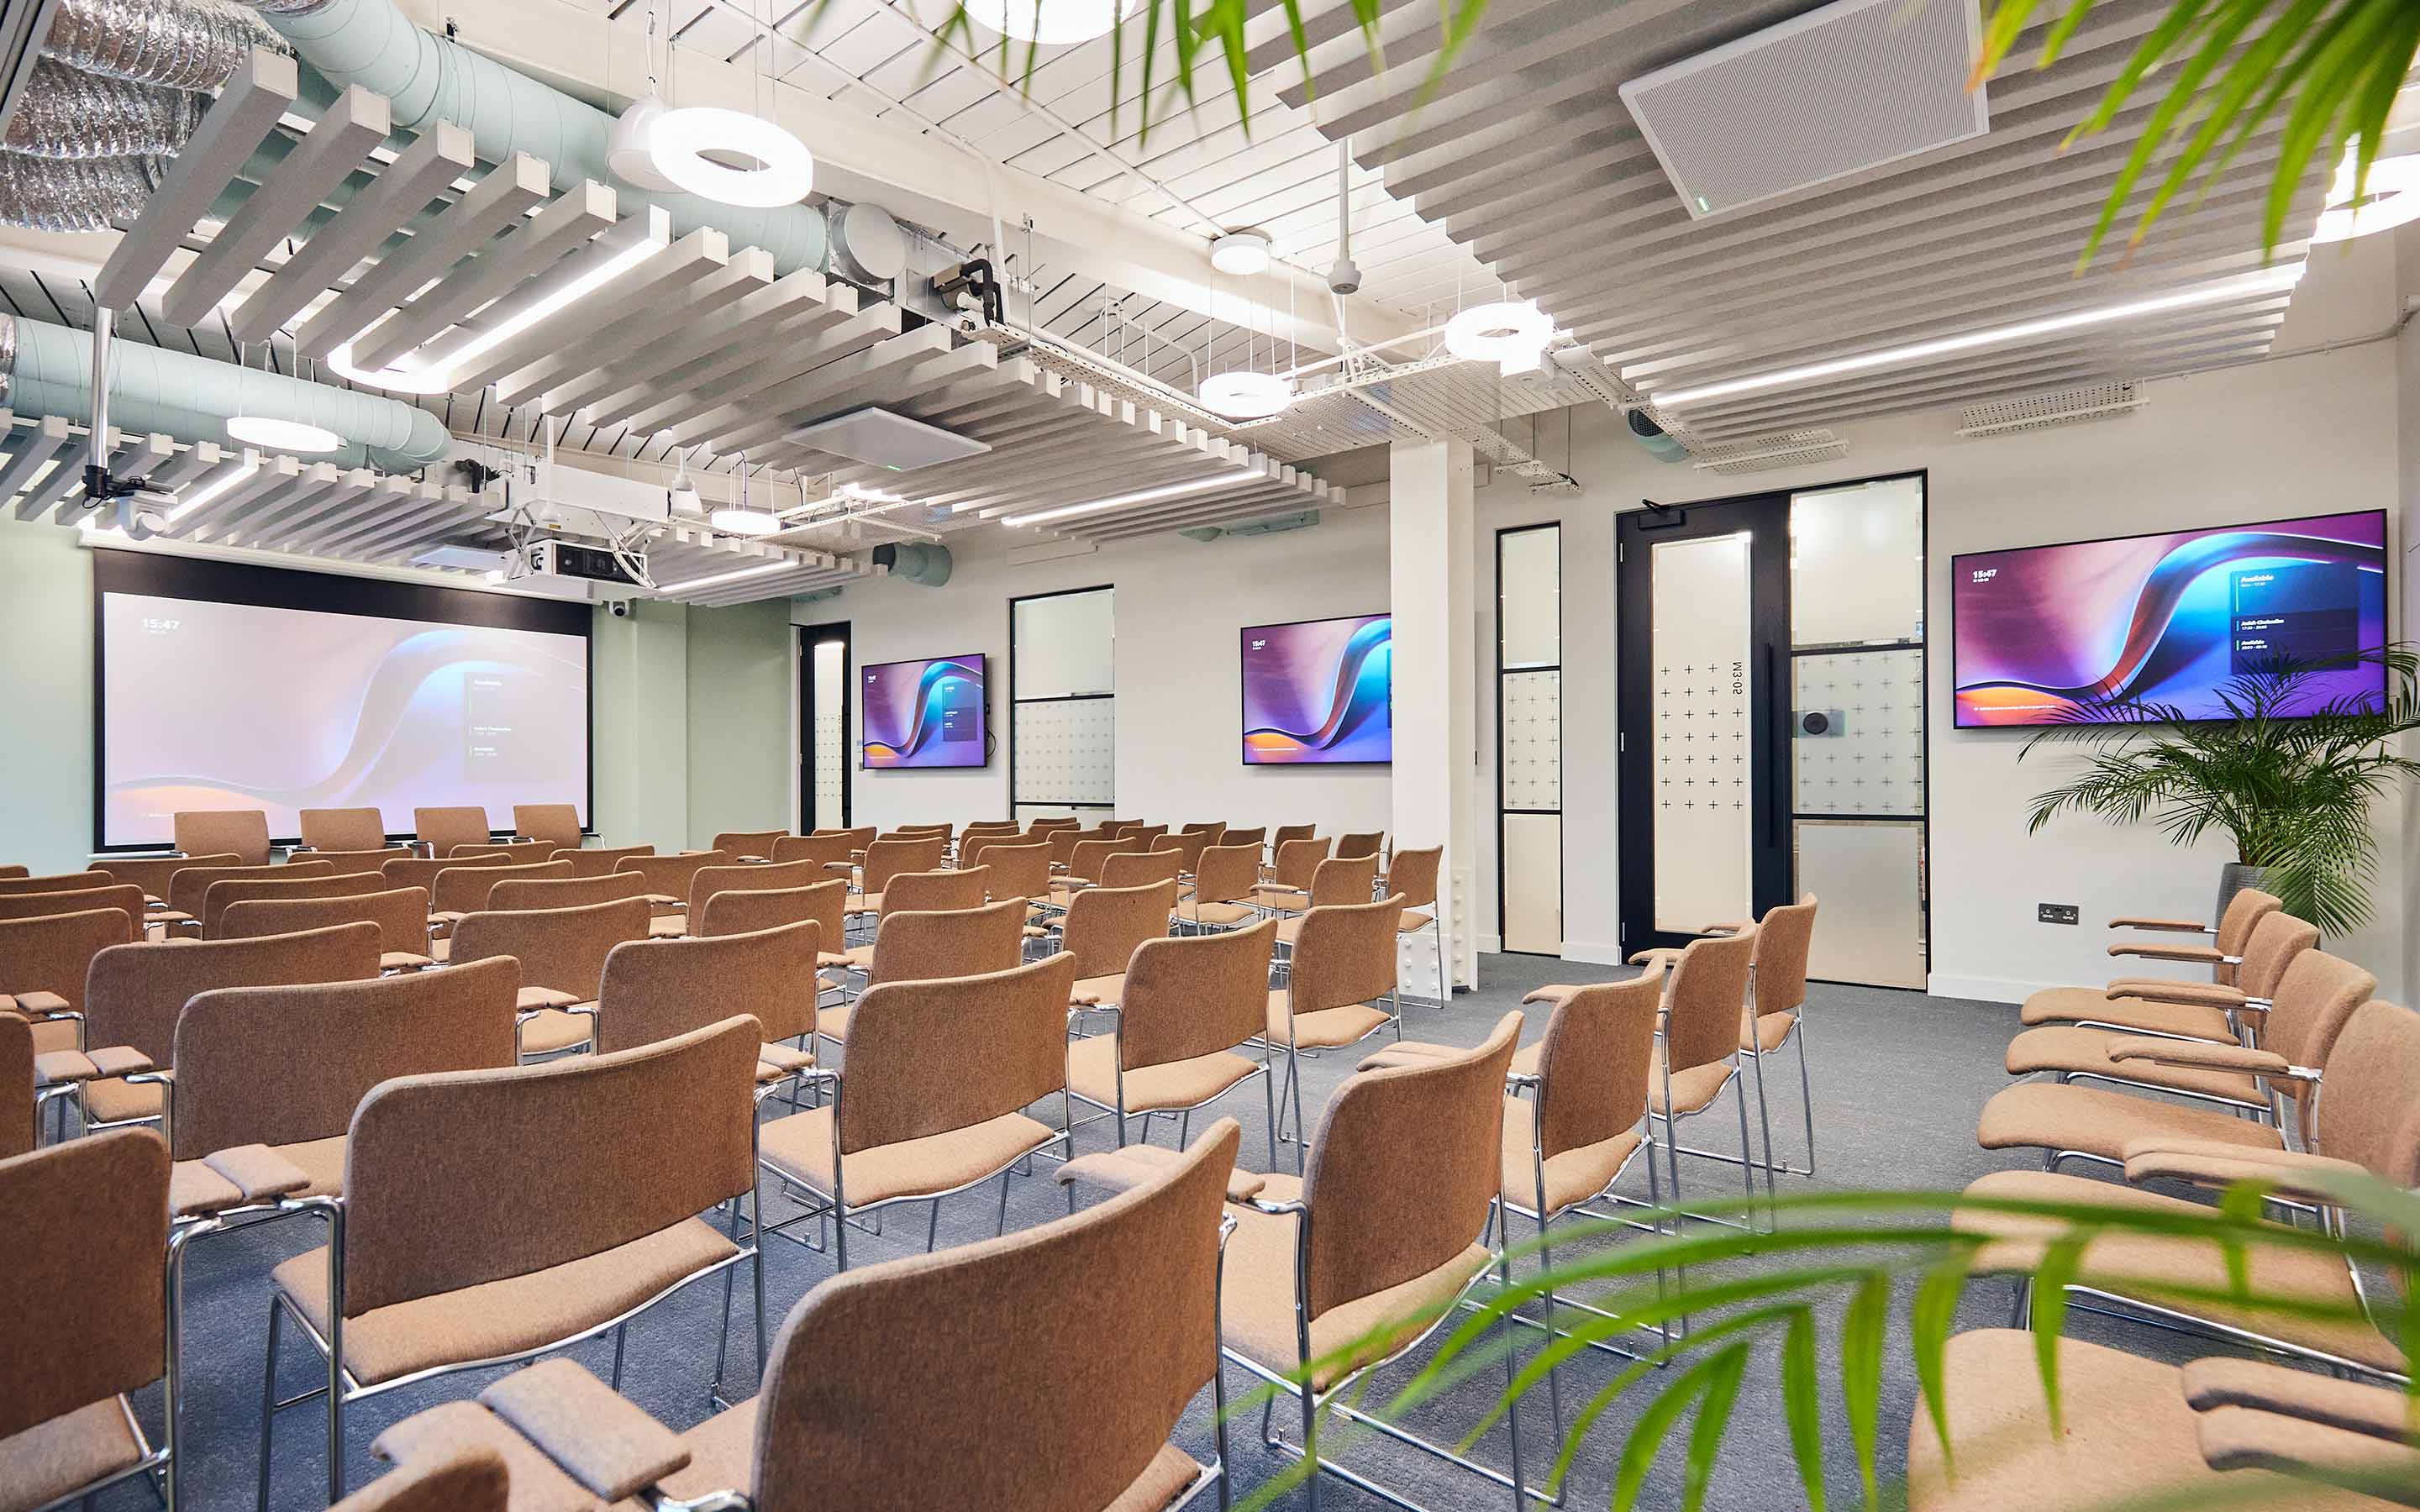 A seminar room in a contemporary office design, with pink comfortable seats, plants, and multiple AV screens